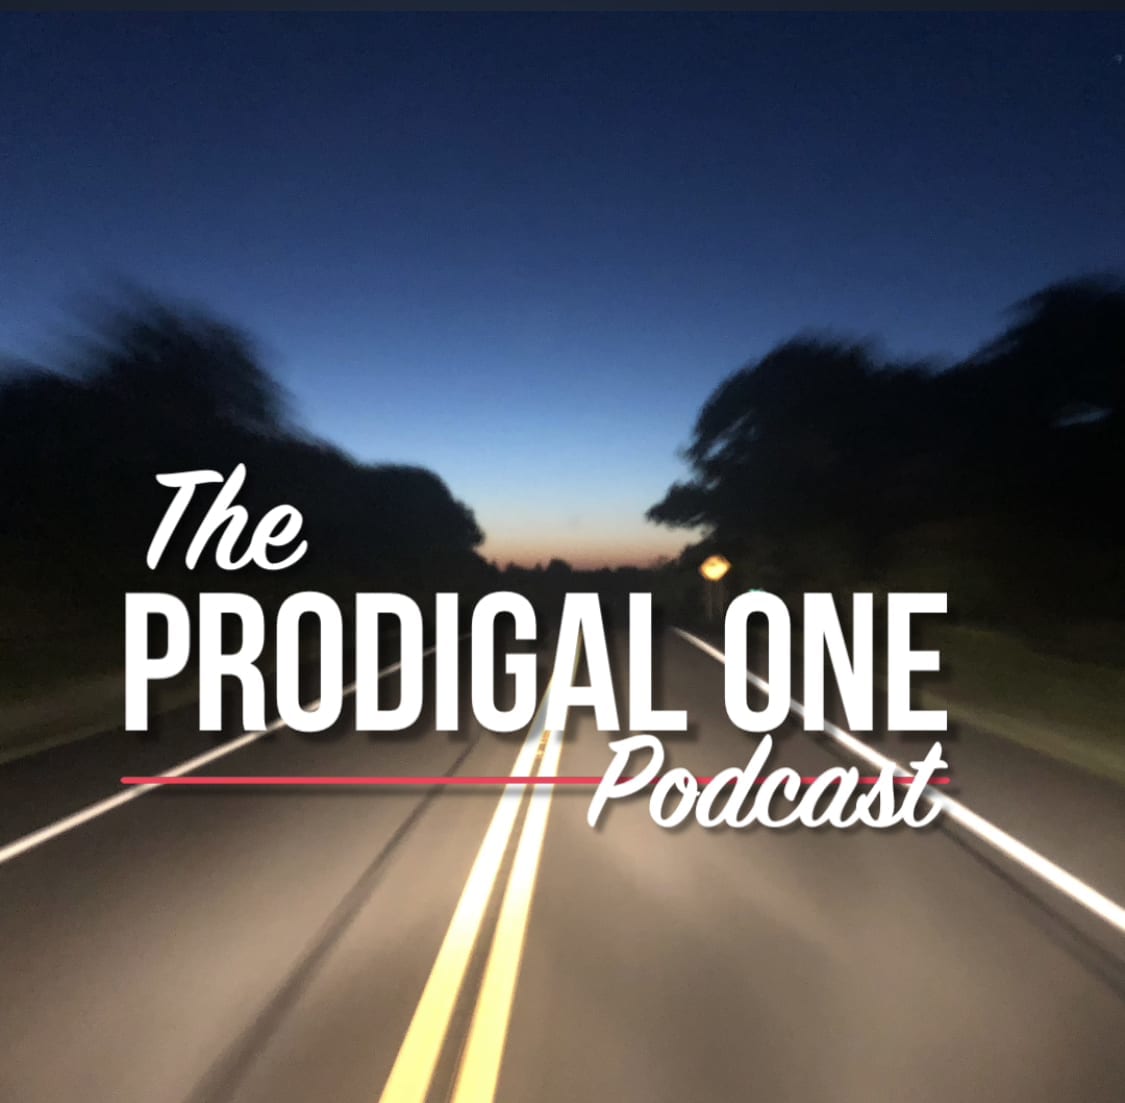 The Prodigal One Podcast and Radio Show